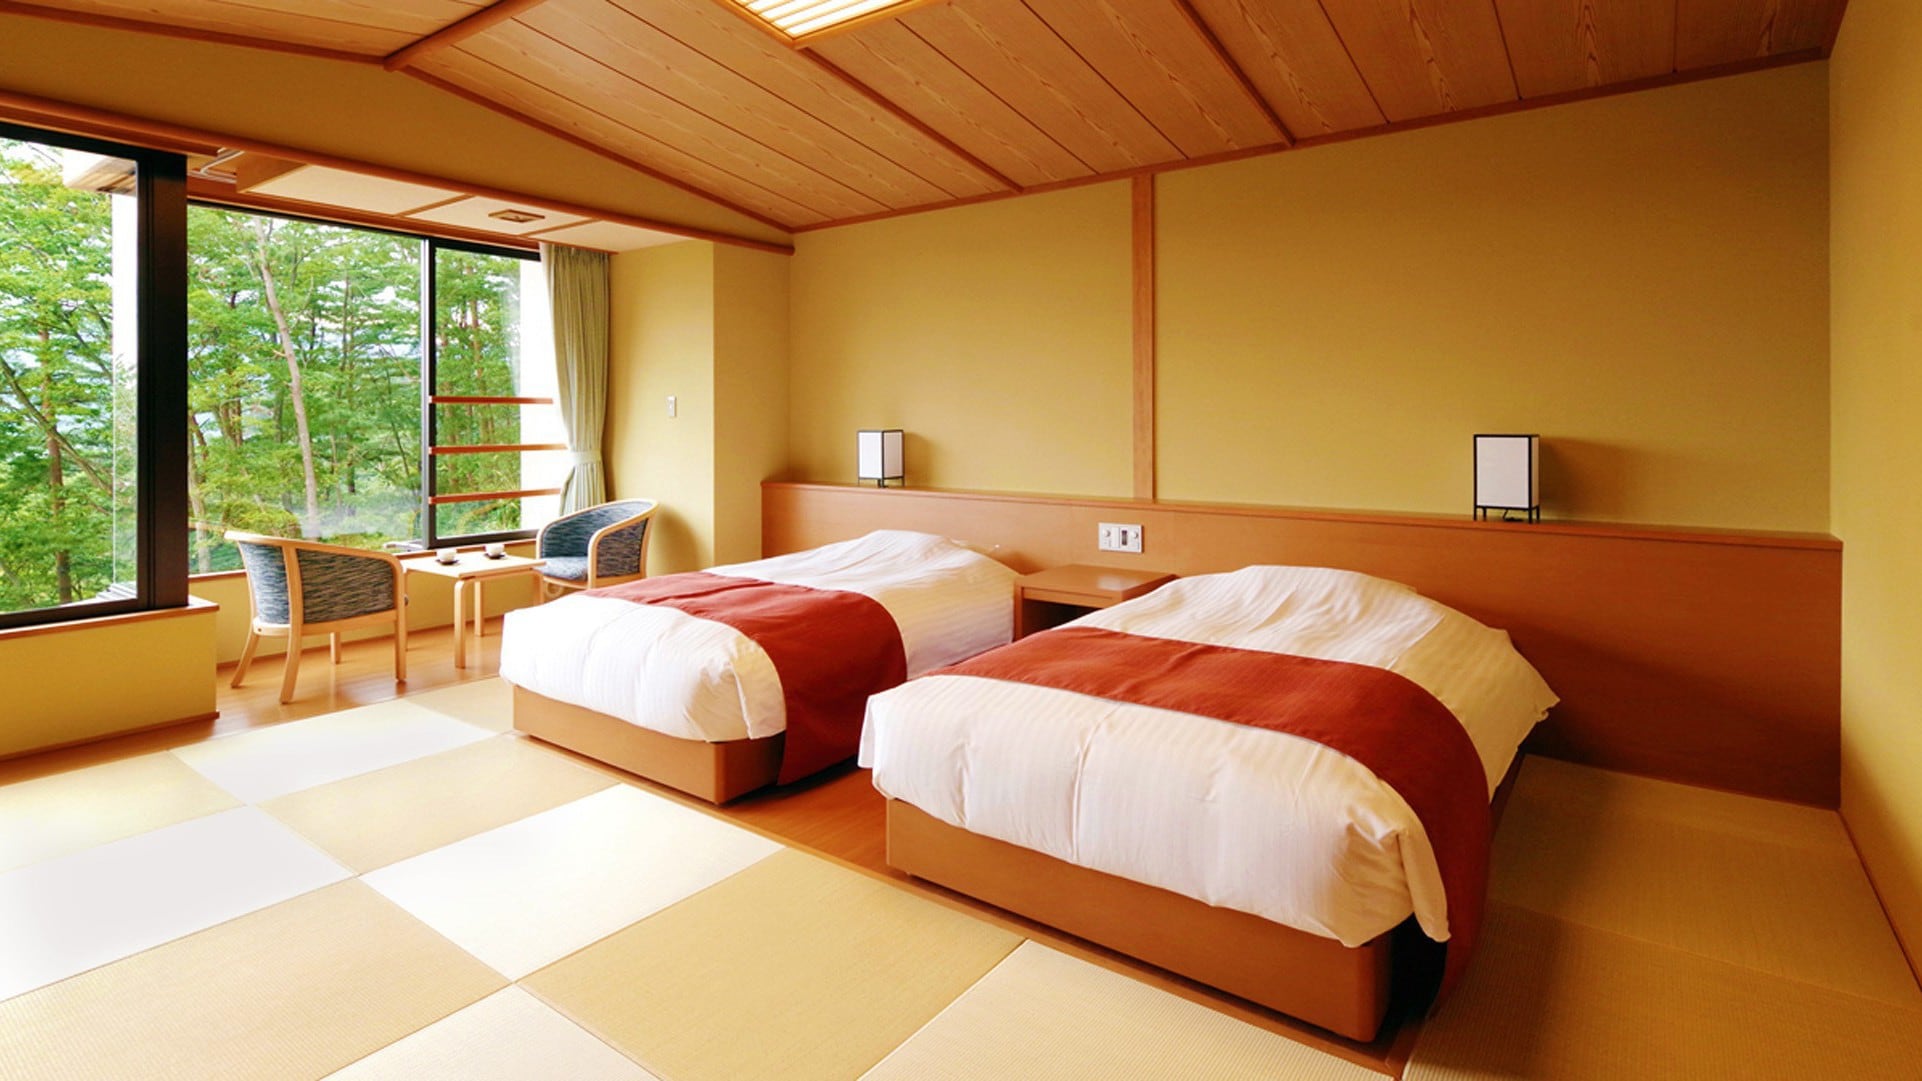 A quaint Japanese modern healing space_Japanese-style bed